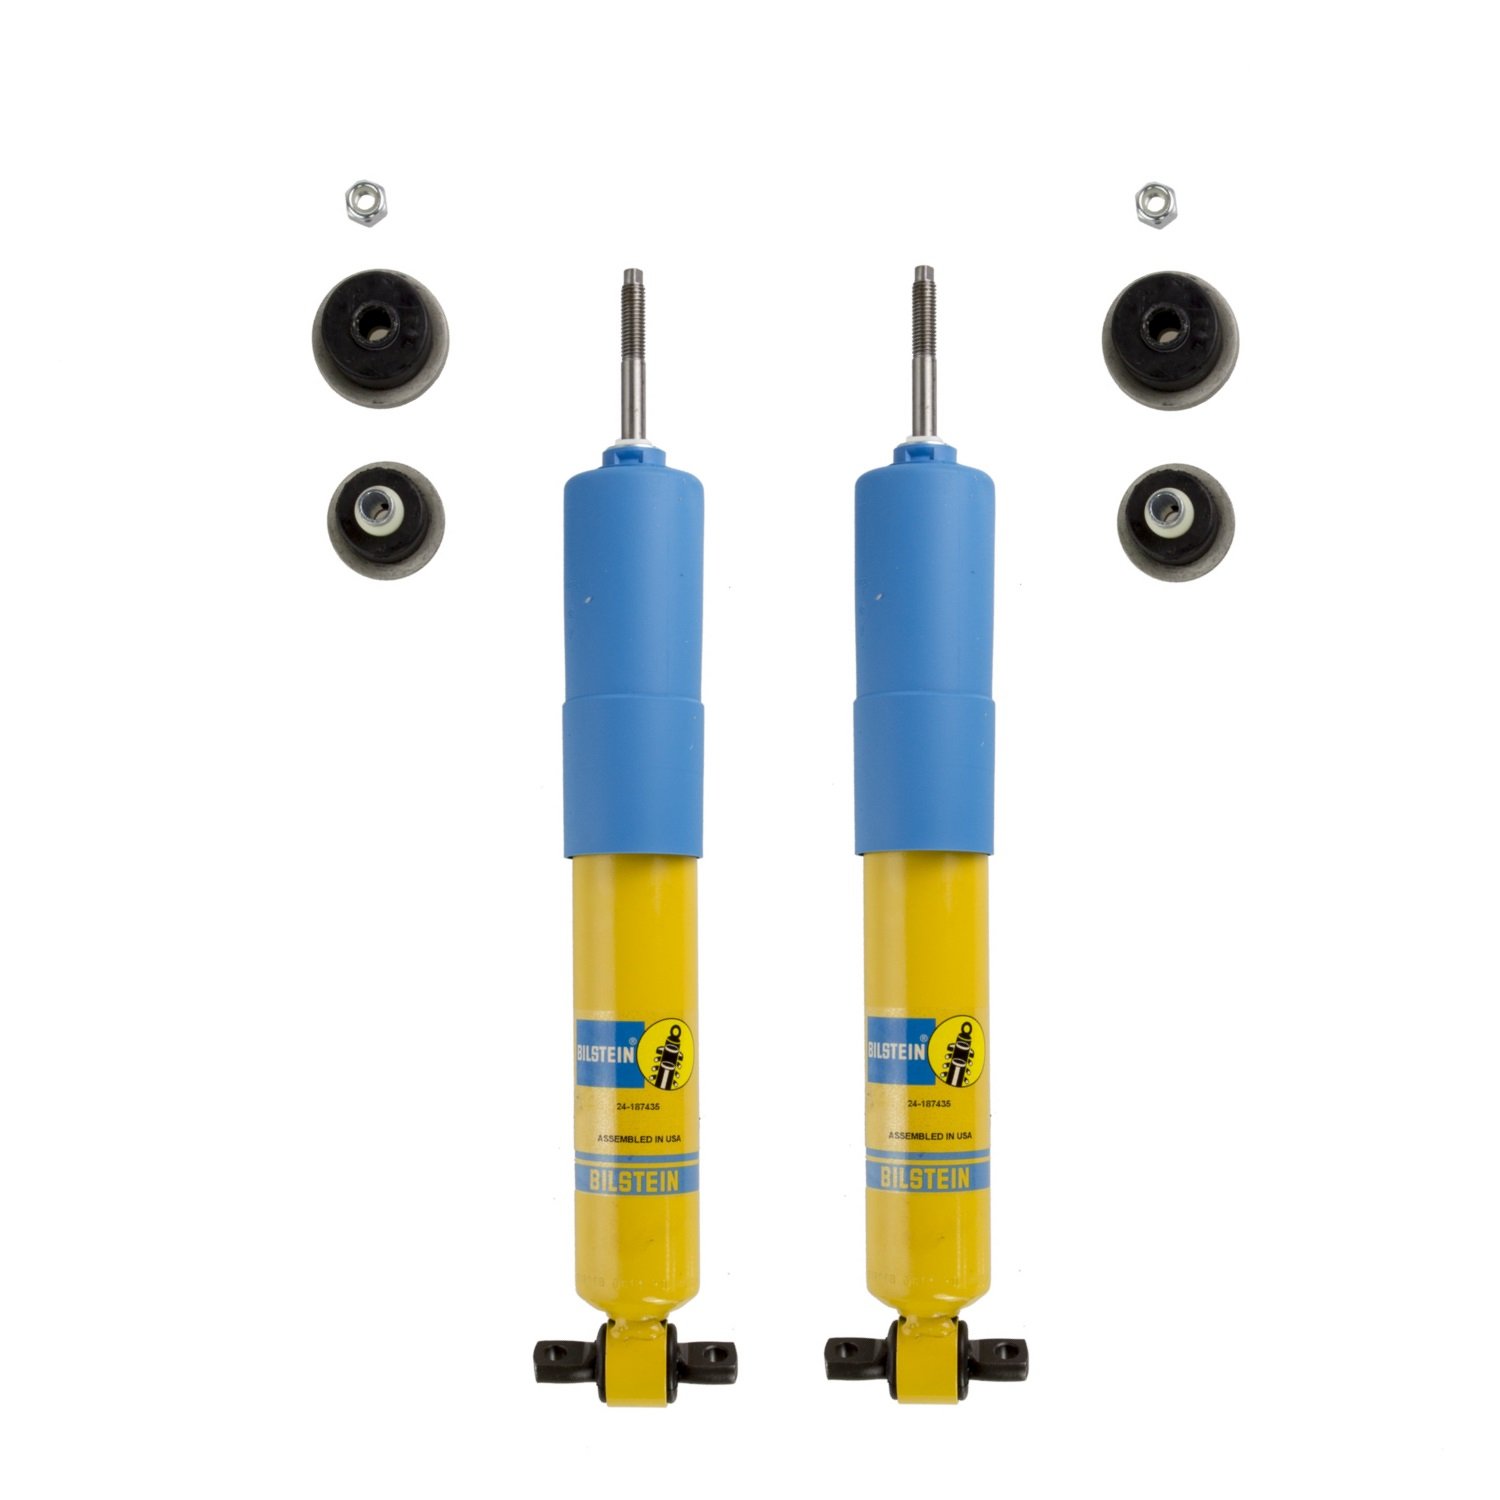 Bilstein For Chevy Silverado 3500 Classic 2007 4600 Series Front Shock Absorber 